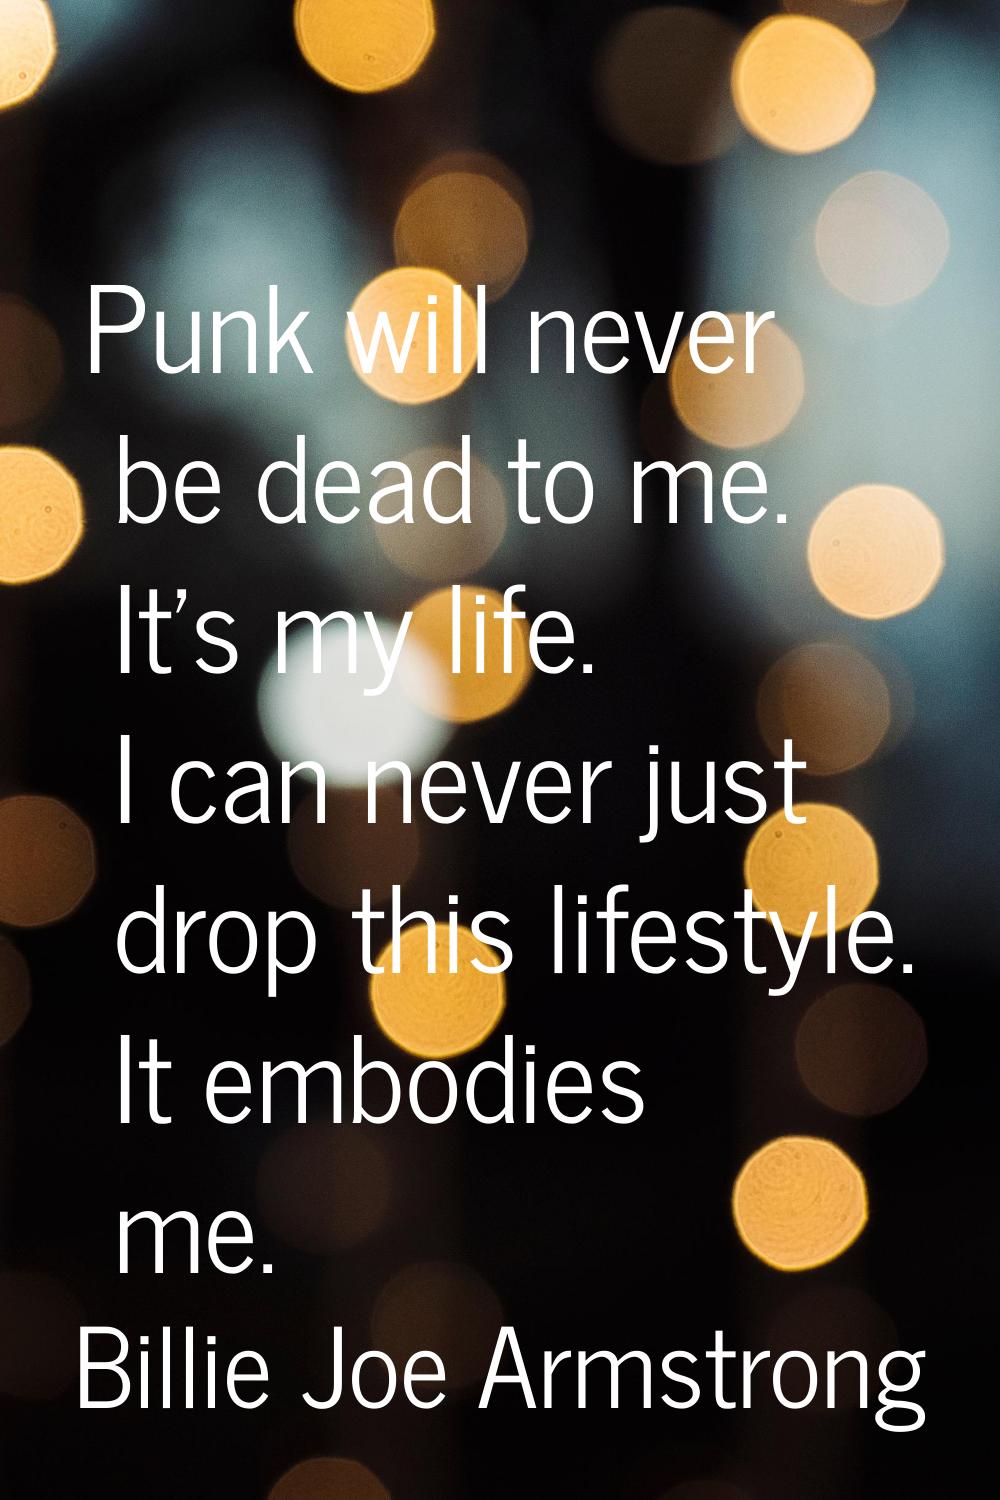 Punk will never be dead to me. It's my life. I can never just drop this lifestyle. It embodies me.